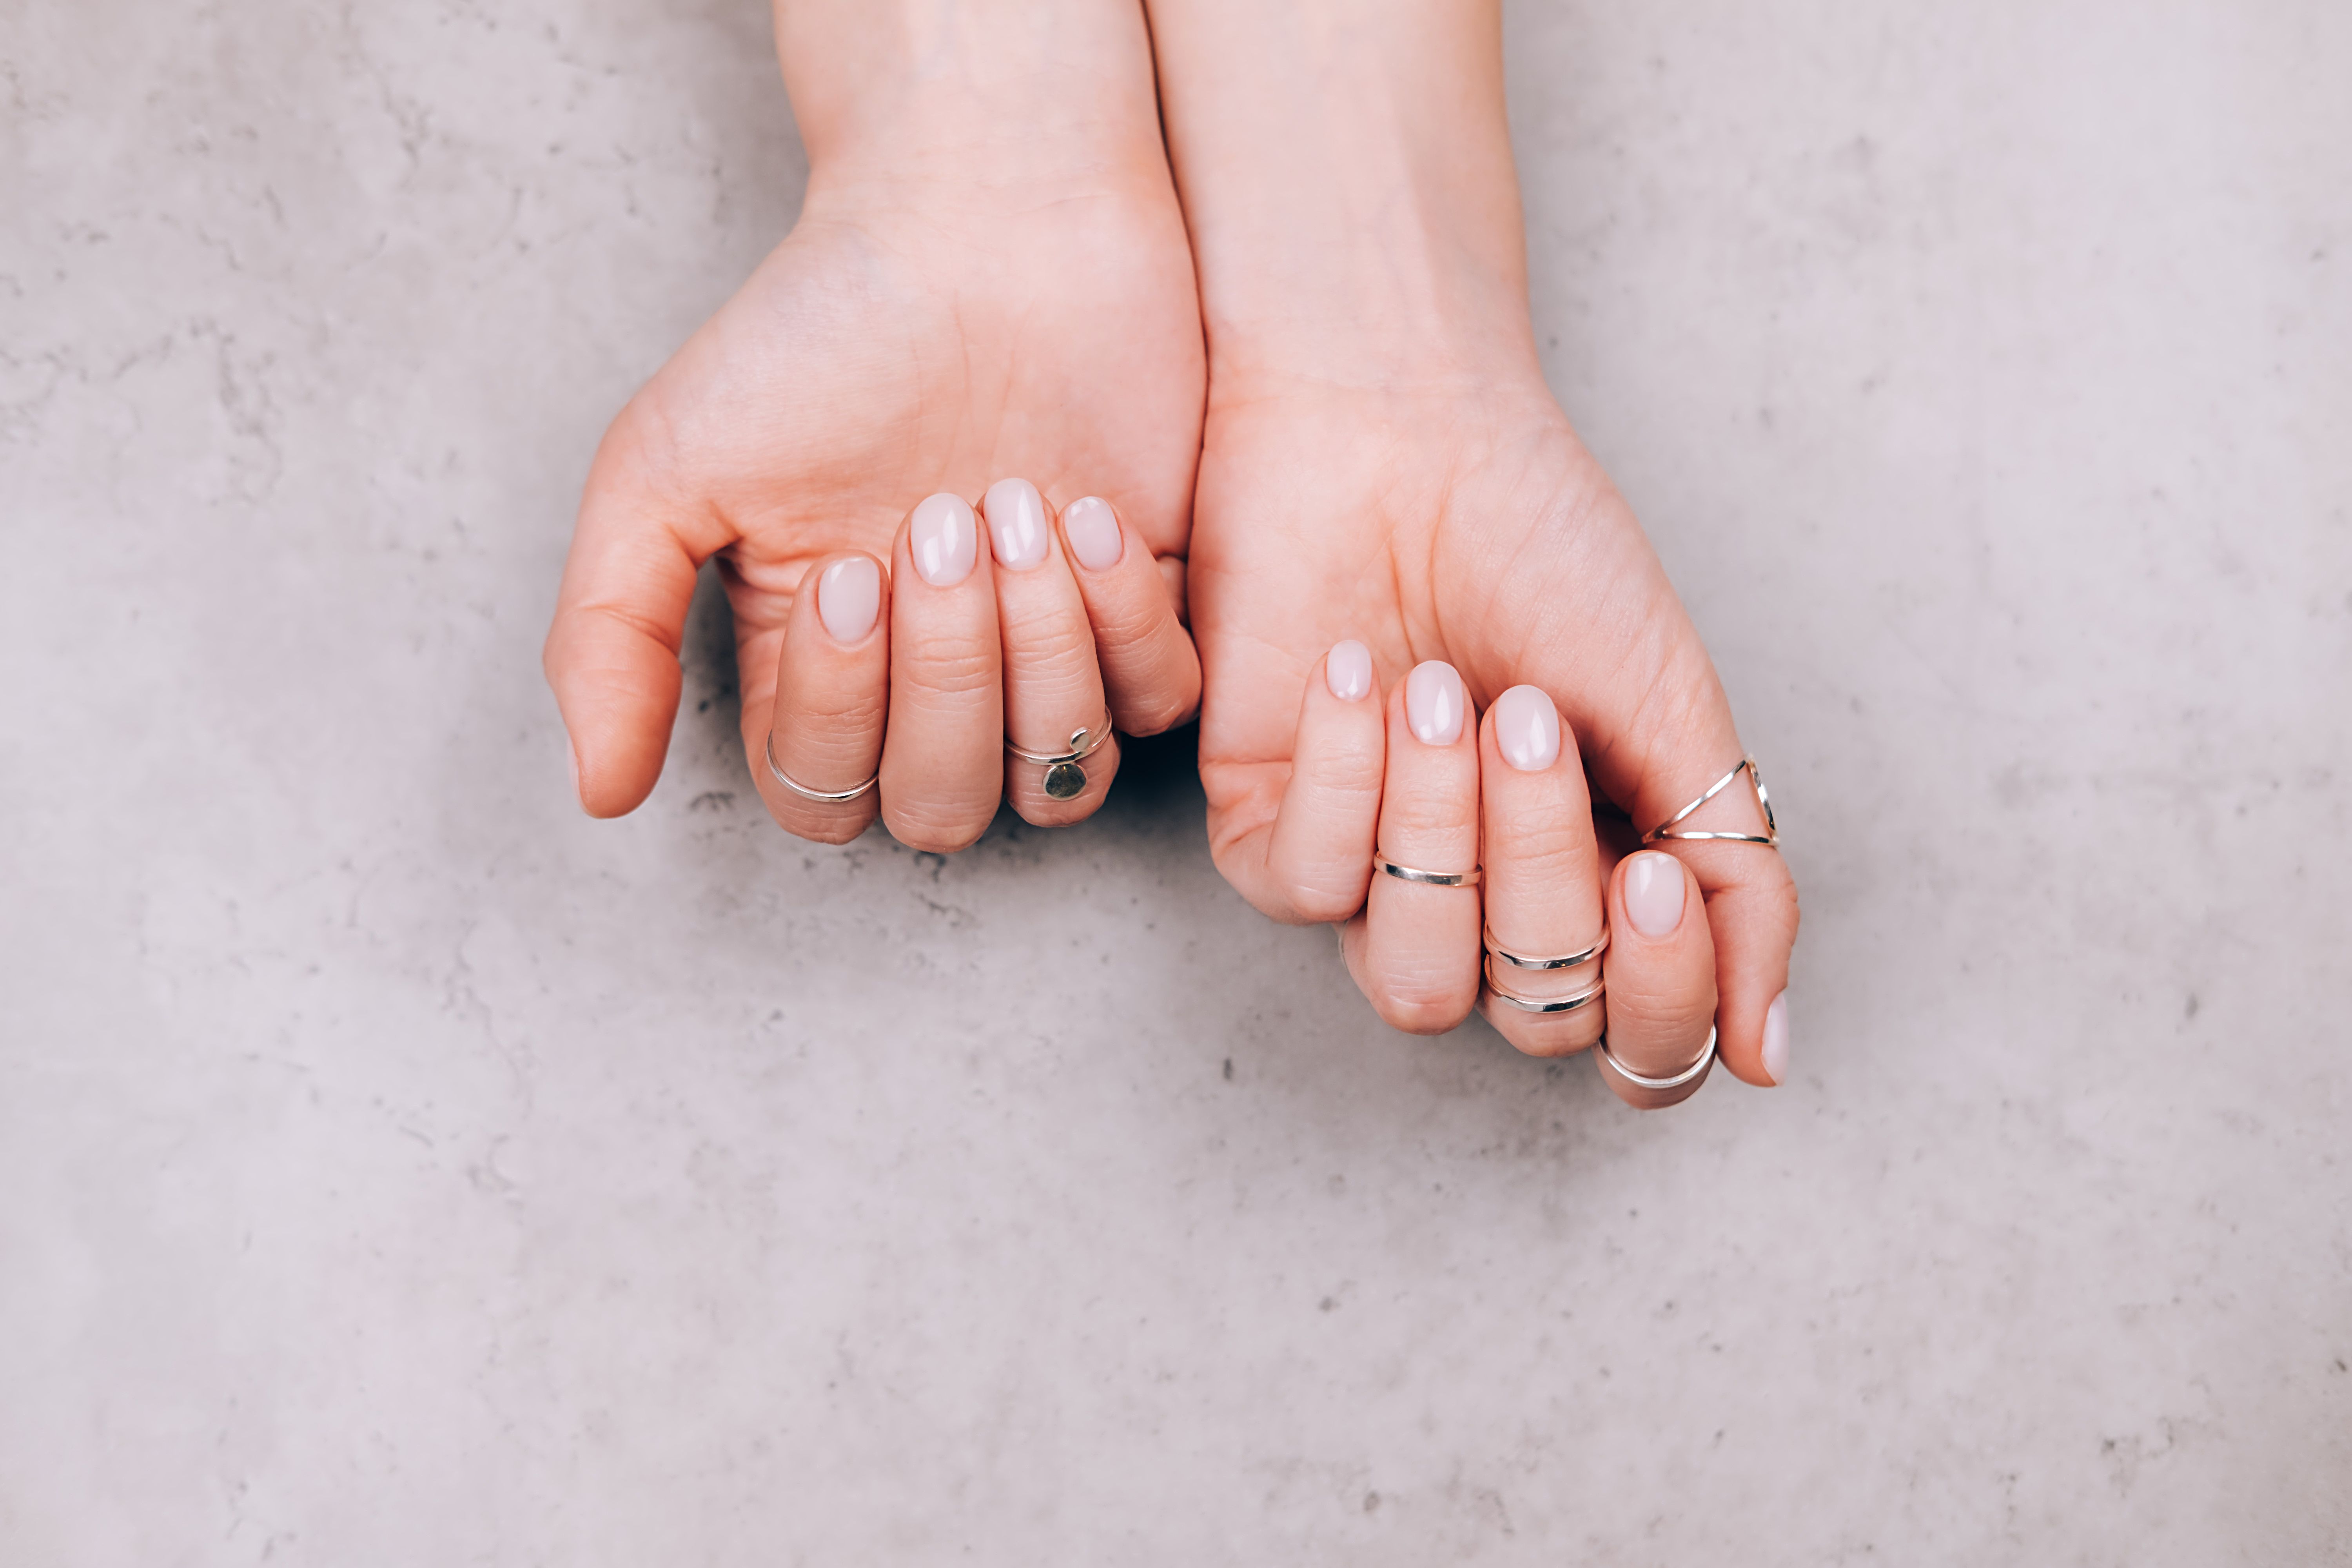 How to Care for Your Nails in Between Shellac Visits